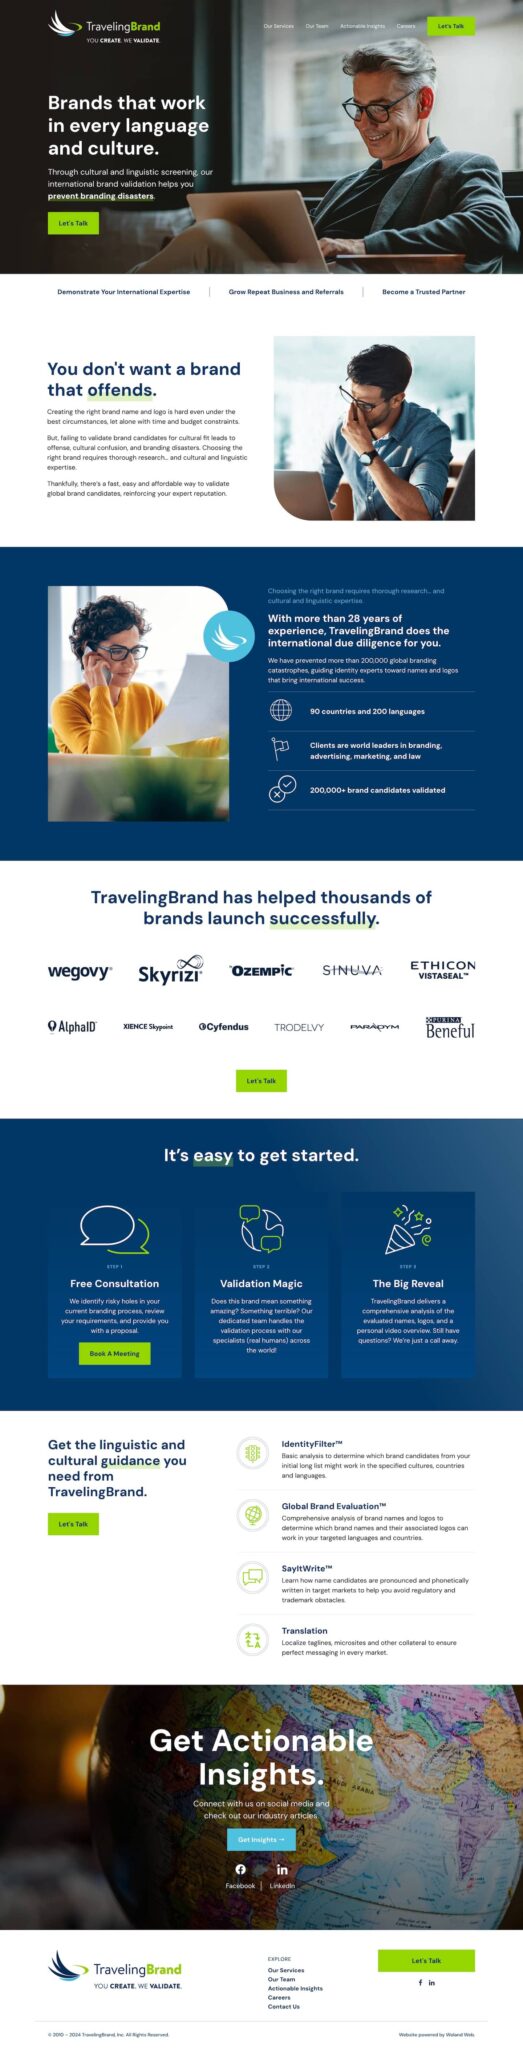 Traveling Brand website home page